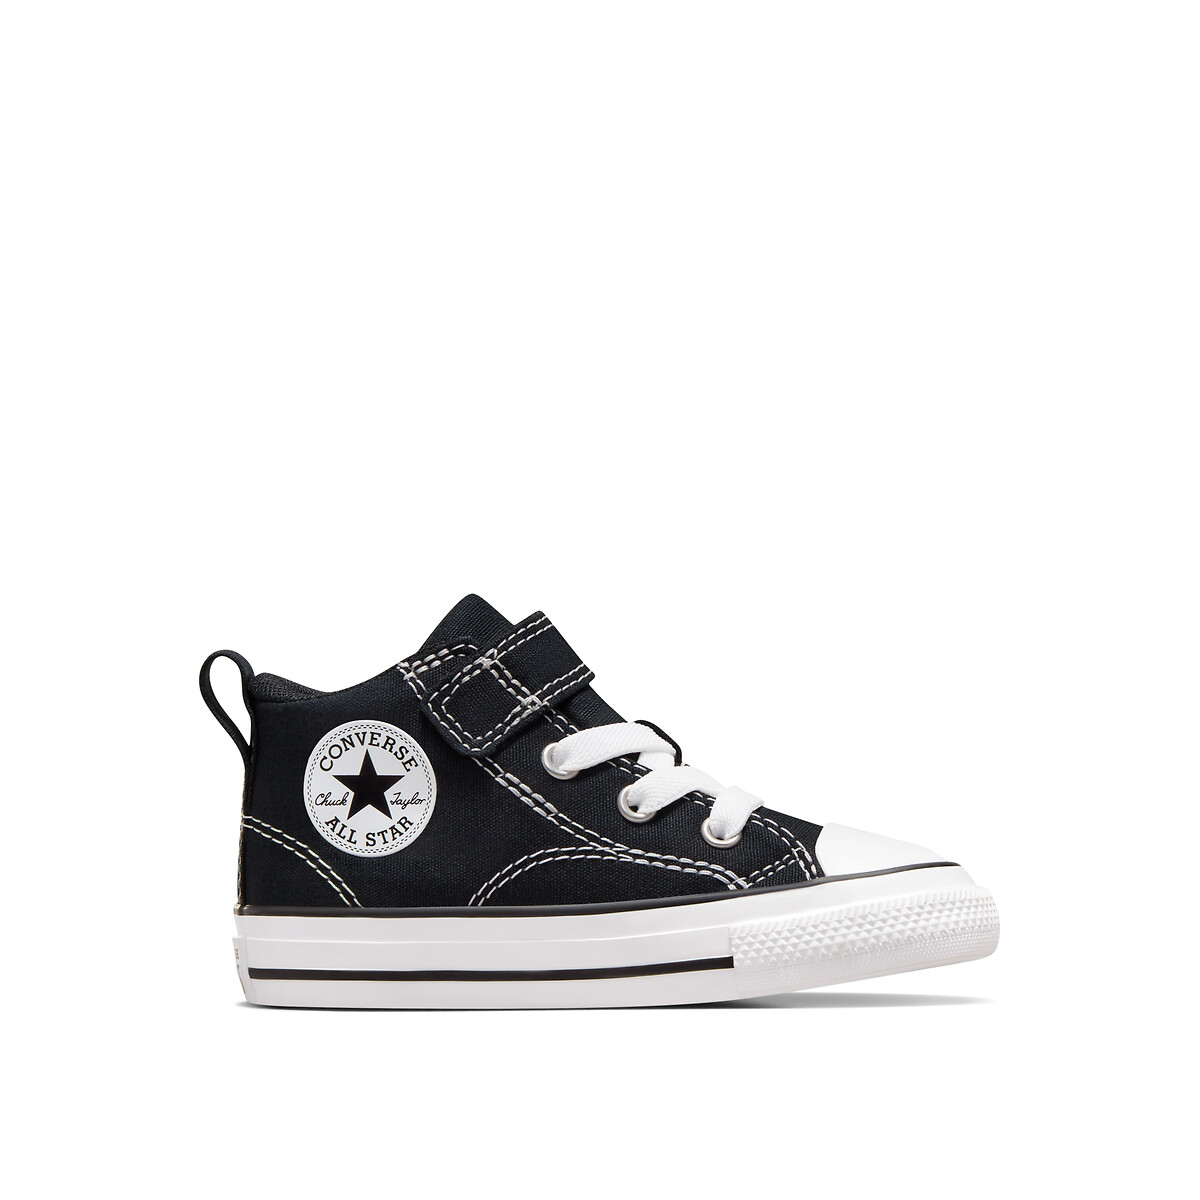 Kids All Star Malden Street Mid Foundation Canvas High Top Trainers